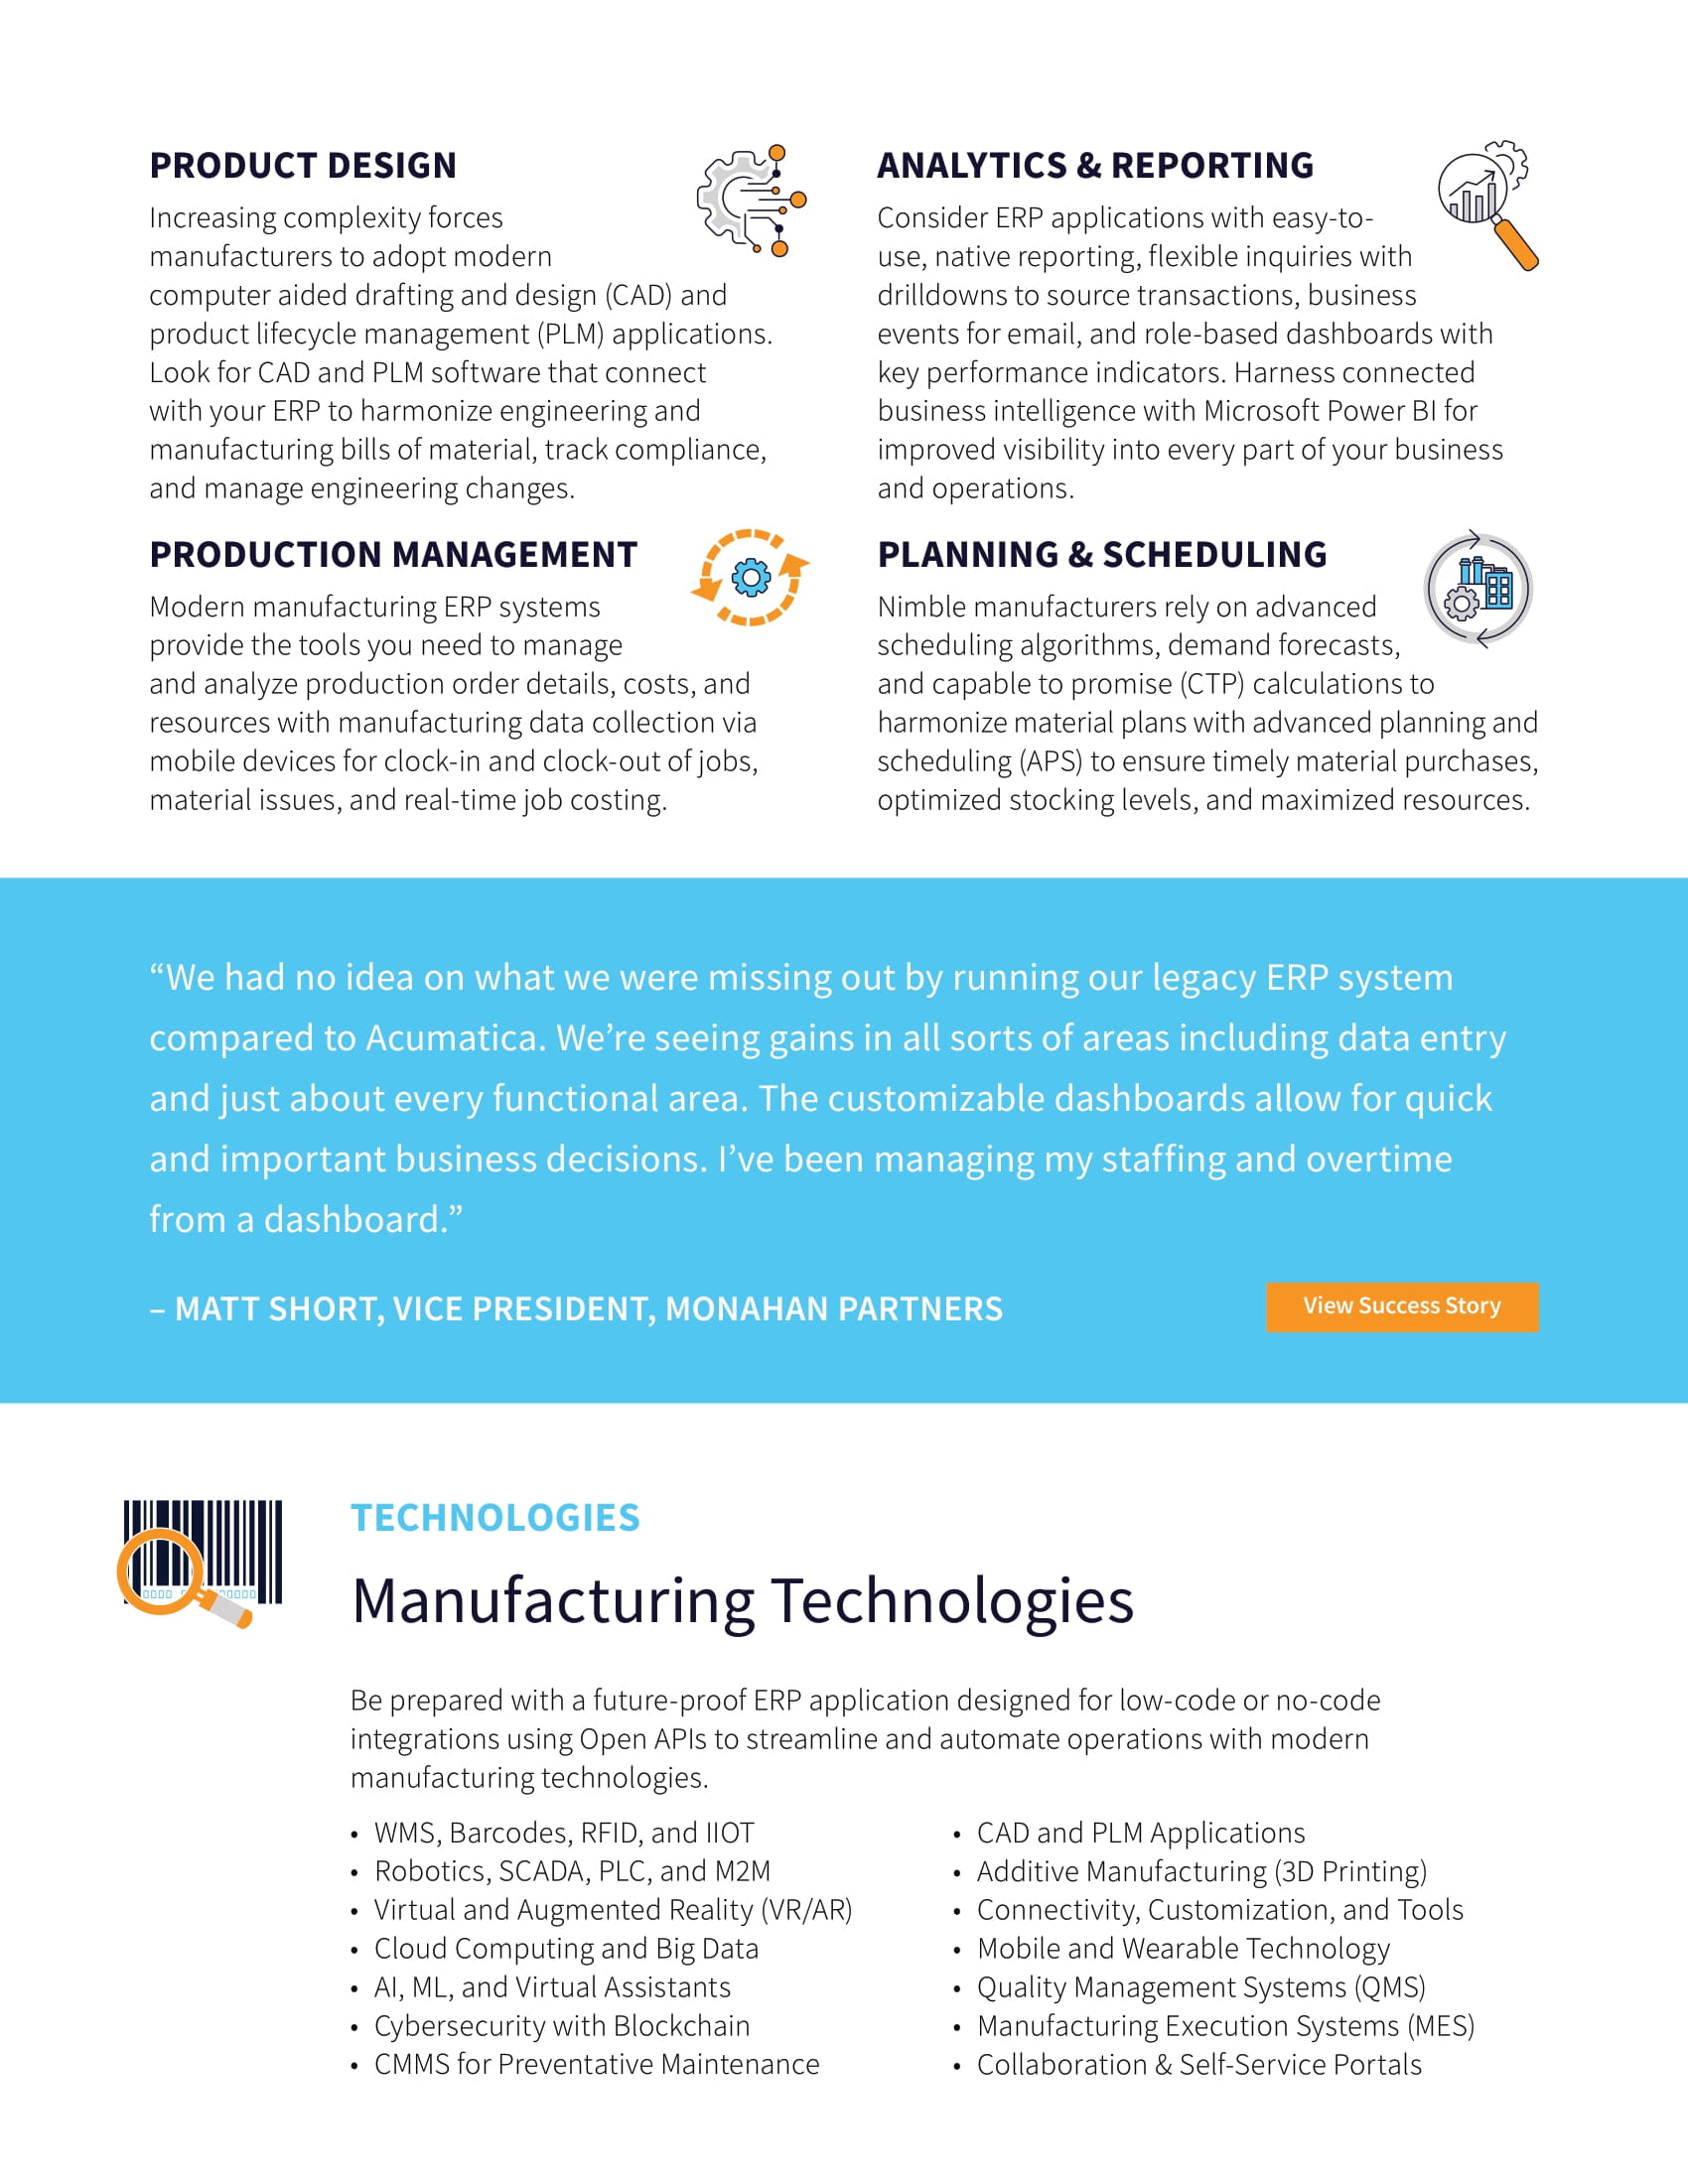 Why Manufacturers of Today Need Modern Manufacturing Technology for the Future, page 2